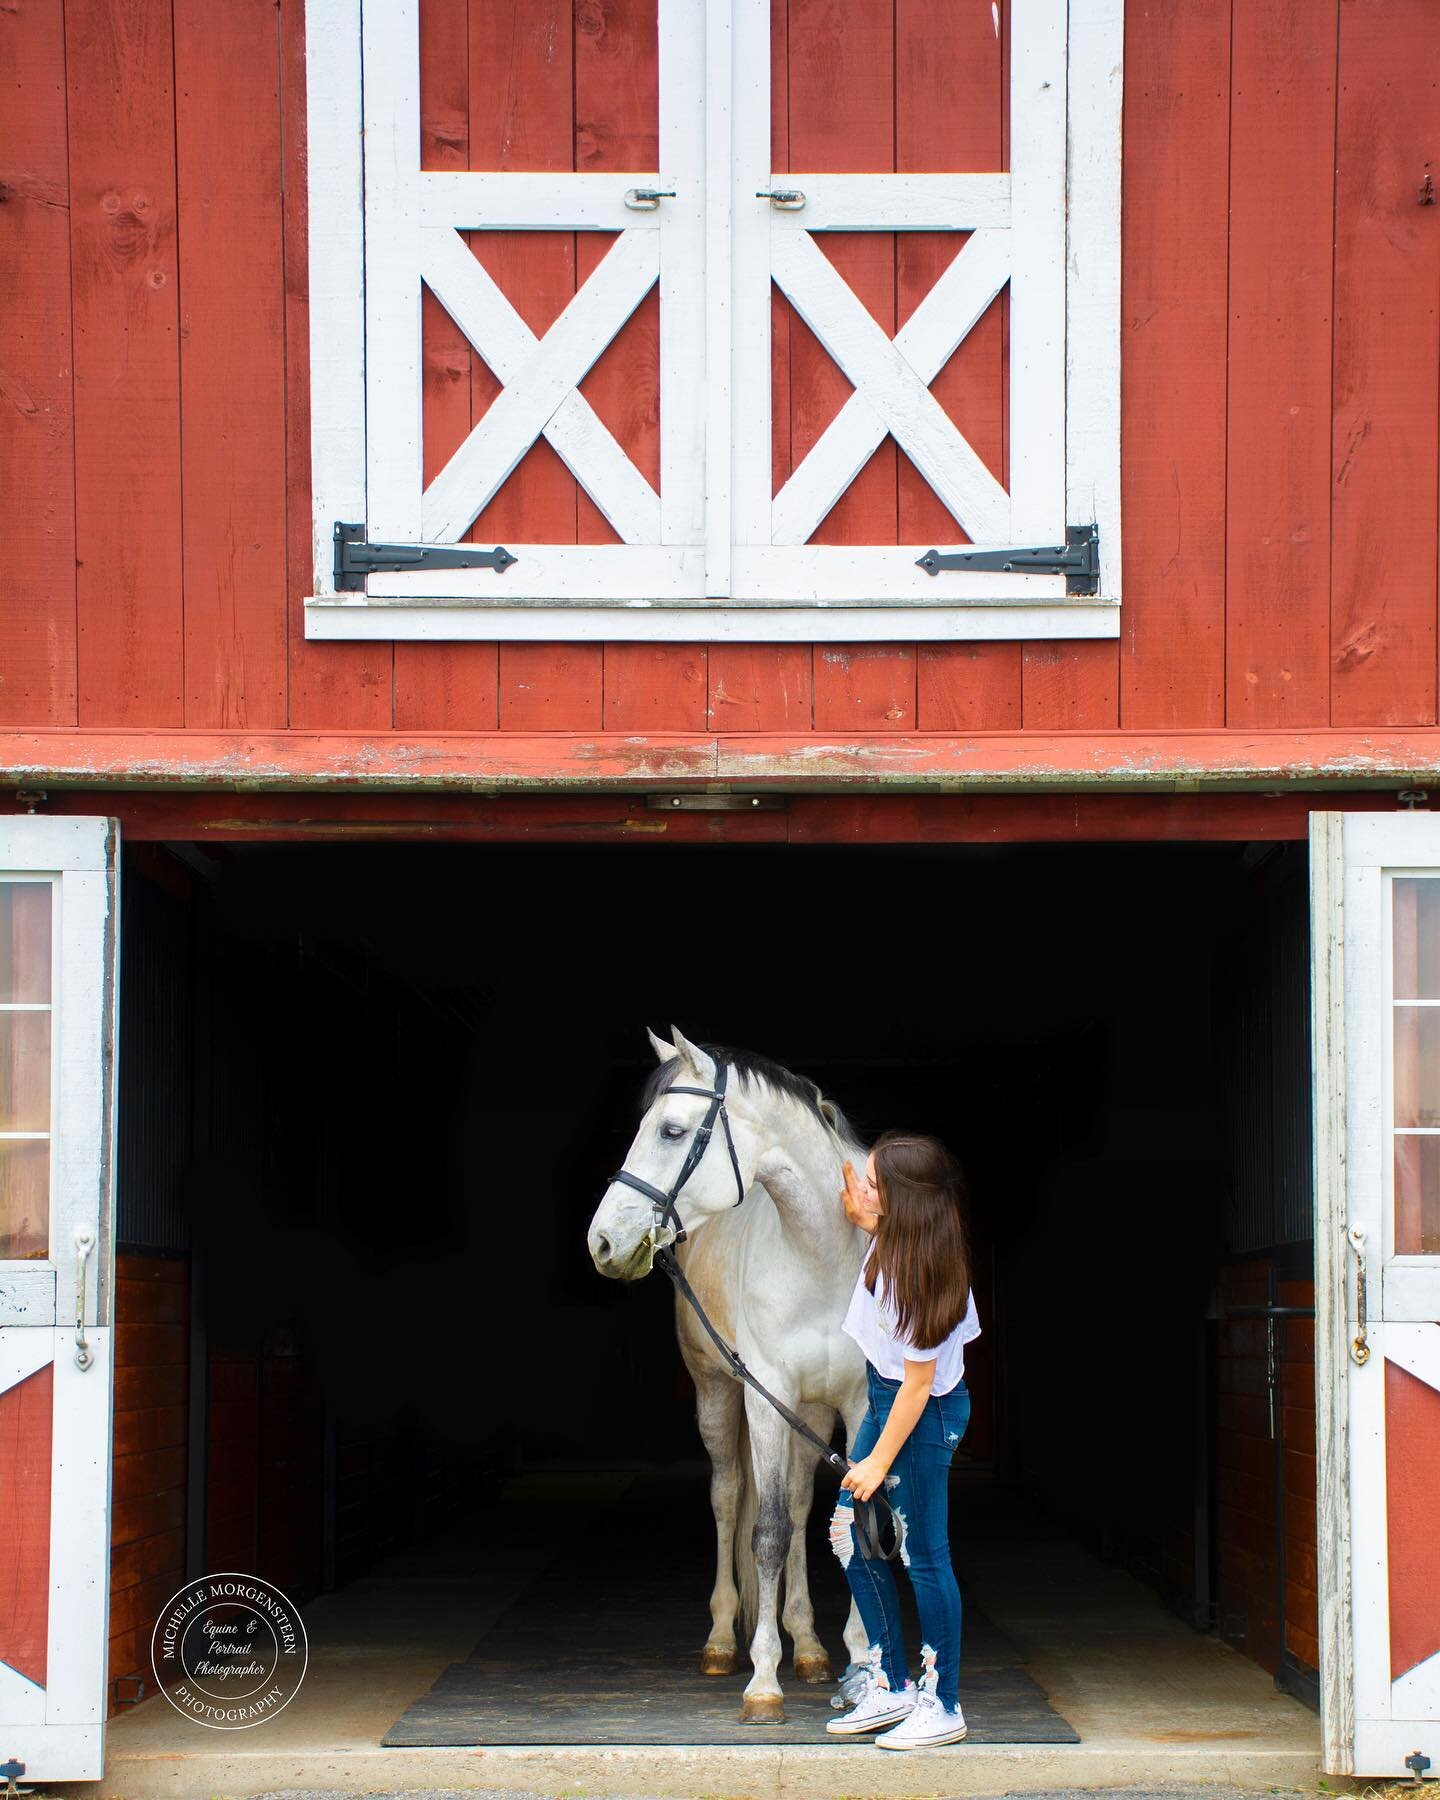 Booking sessions for 2021! 
CT/NY - Available for horse shows, black background equine portraits, portrait sessions &amp; more! 
&bull;
&bull;
&bull;
&bull;
&bull;
&bull;
&bull;
&bull;
&bull;
&bull;
&bull;
&bull;
&bull;
&bull;
&bull;
&bull;
&bull;
&b